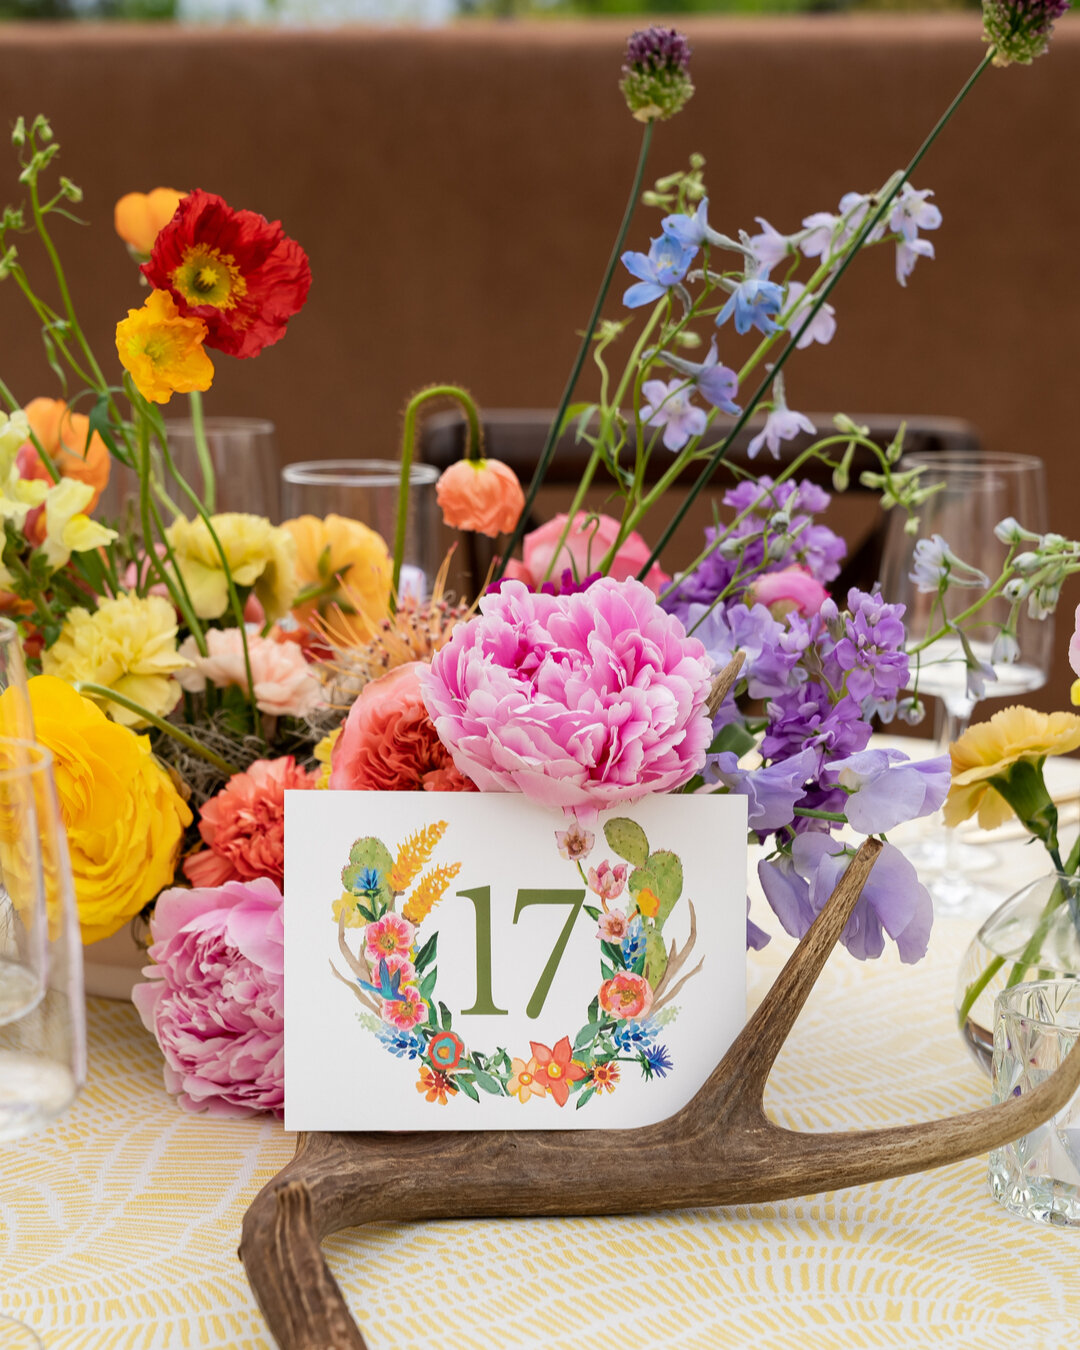 Let's #branditall, even down to making your table numbers gorgeous! ​​​​​​​​​
Planning: @brooksandbarnes